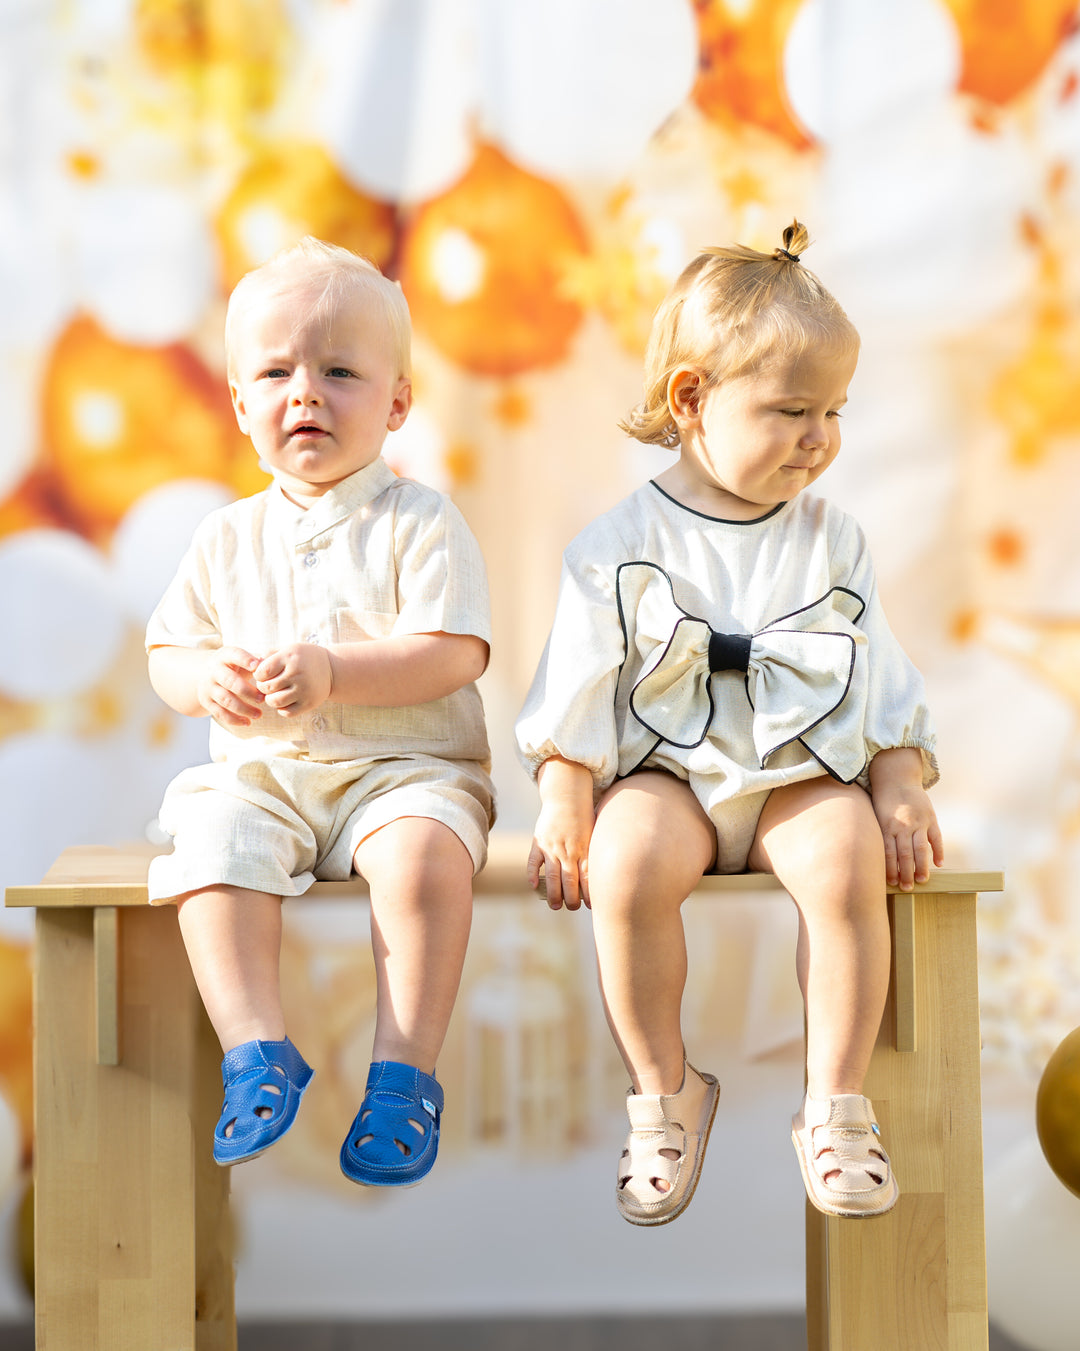 mace and co kids clothing dubai, linen romper with long sleeves and a bow on the front, for girls ages infant, toddler and up to seven years old. Pictured with the boys linen shirt and shorts set. Both outfits perfect for formal occasions, birthday parties and playtime.